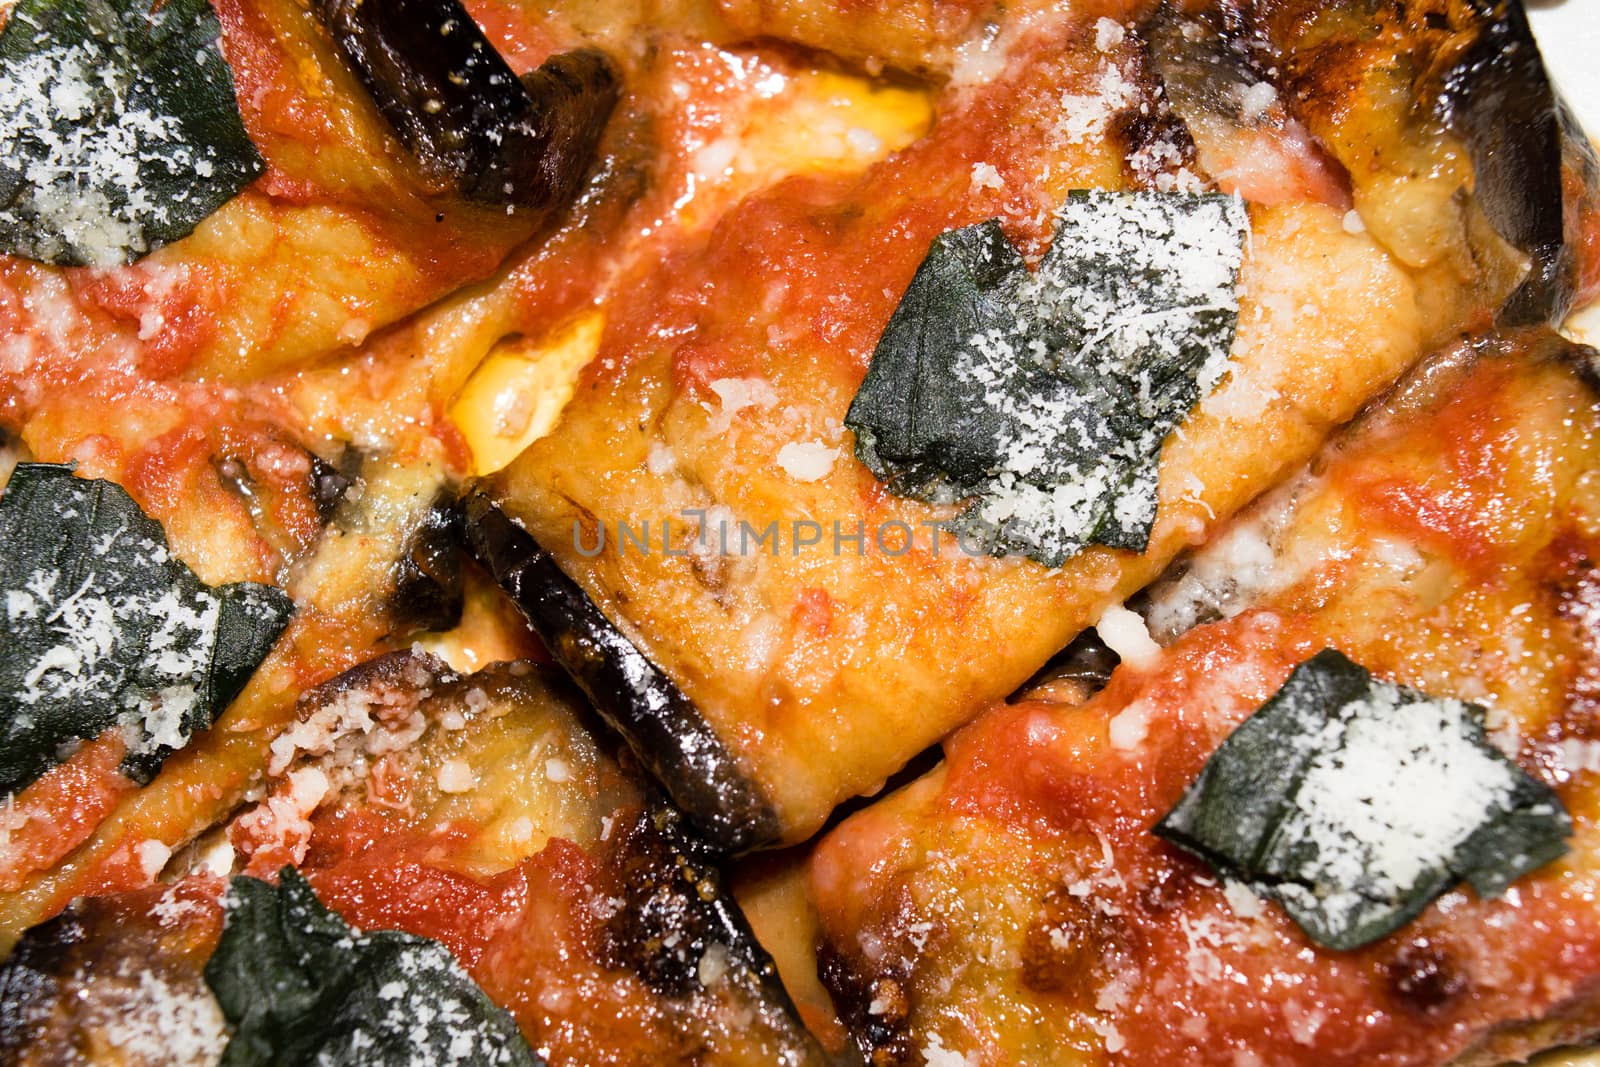 rolled slices of eggplant, stuffed with ham and cheese, served with tomato basil and grated Parmesan cheese and baked